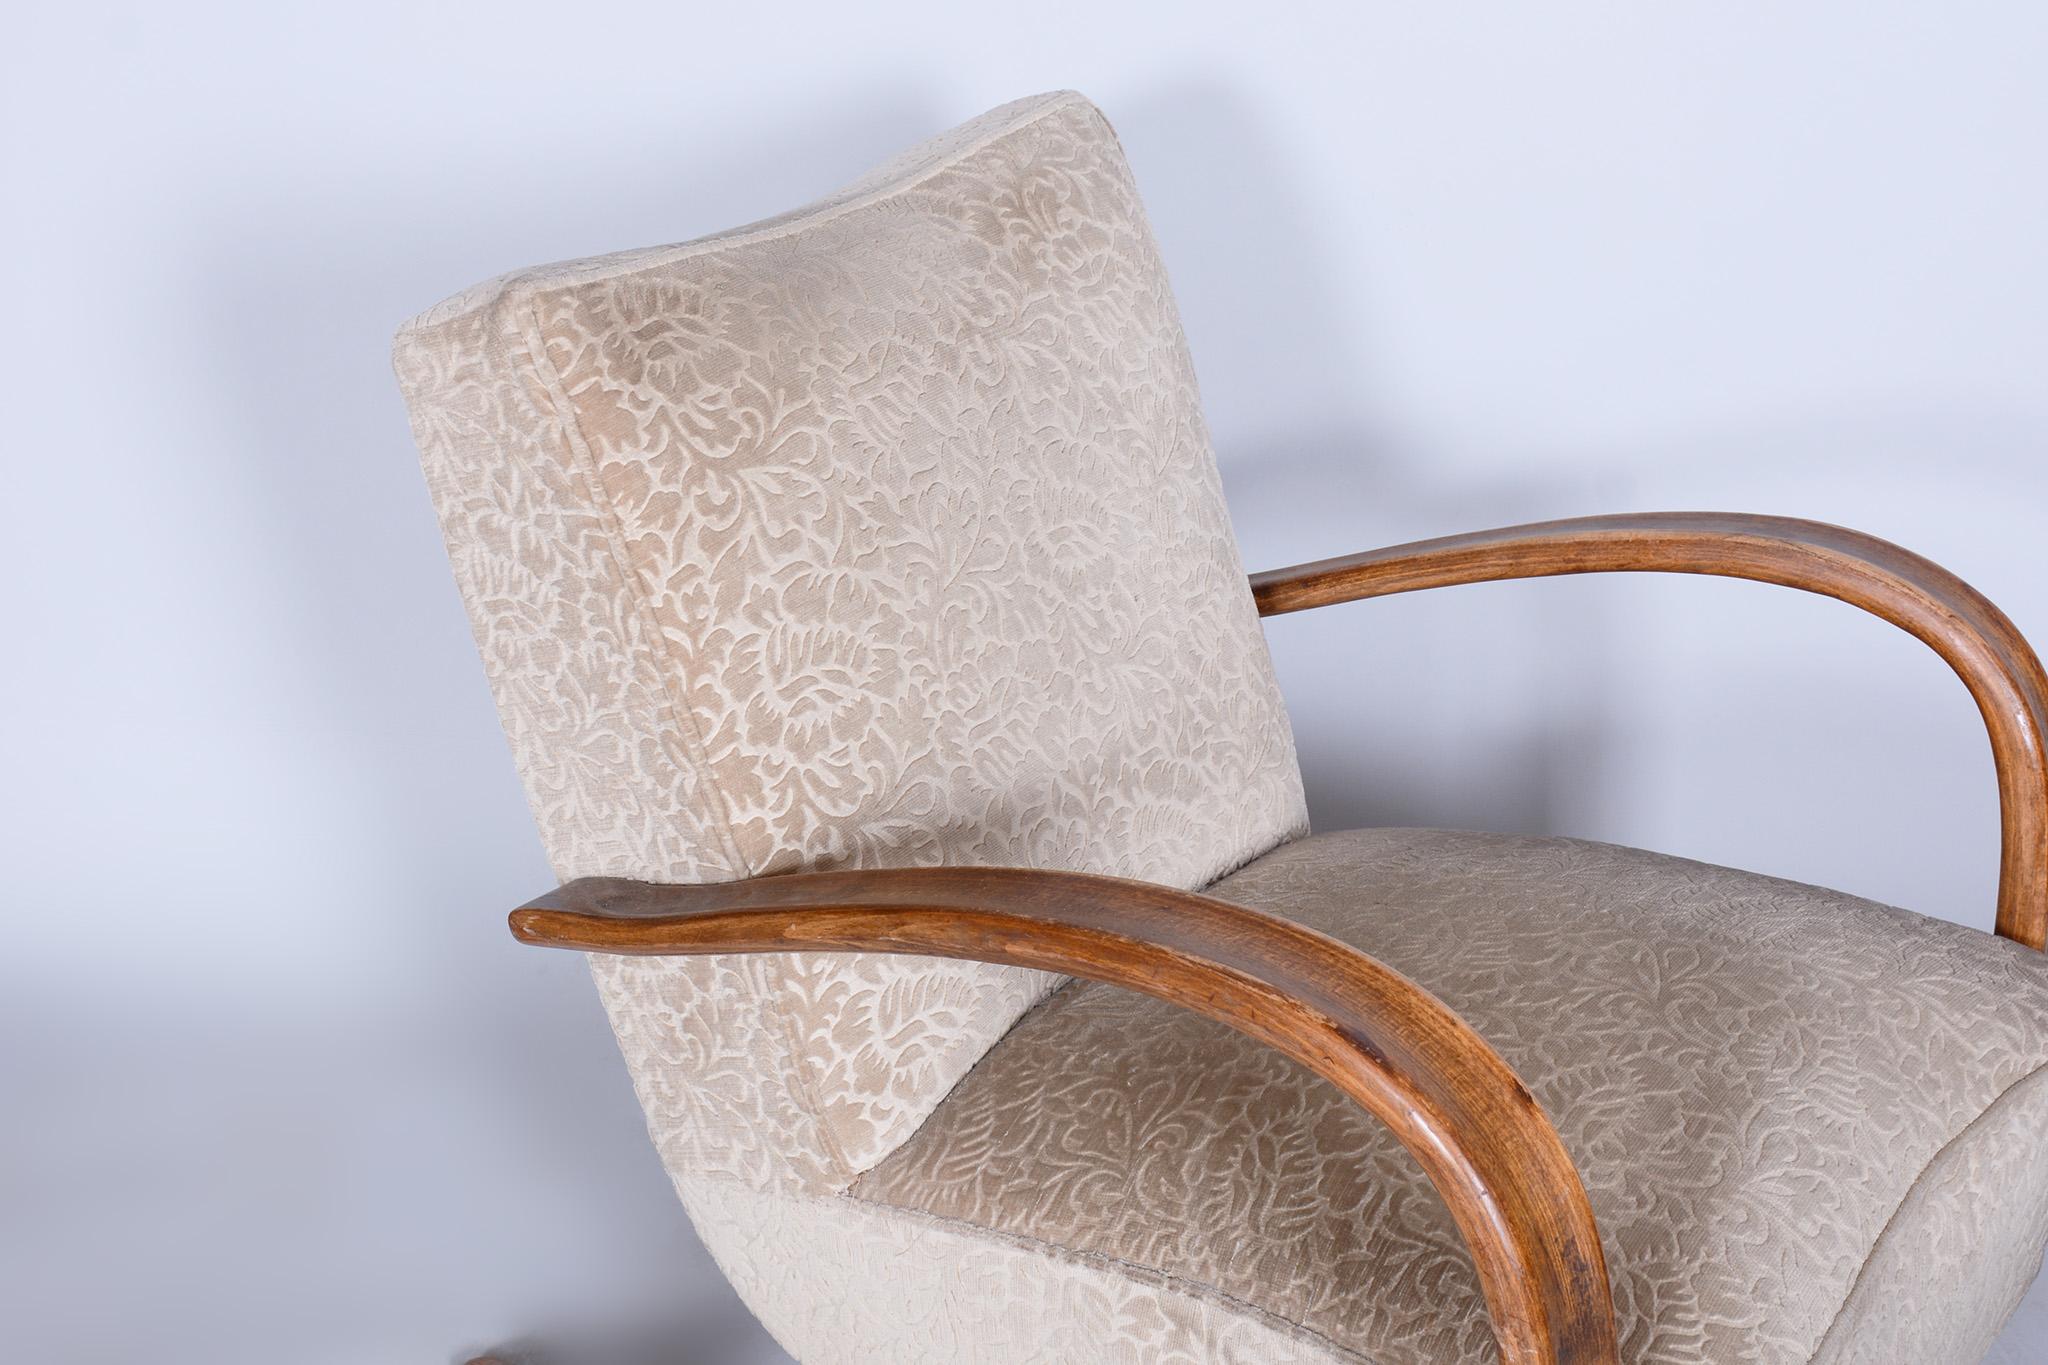 Pair of Beige H-269 Armchairs Designed by Jindrich Halabala for UP Zavody, 1930s In Good Condition For Sale In Horomerice, CZ